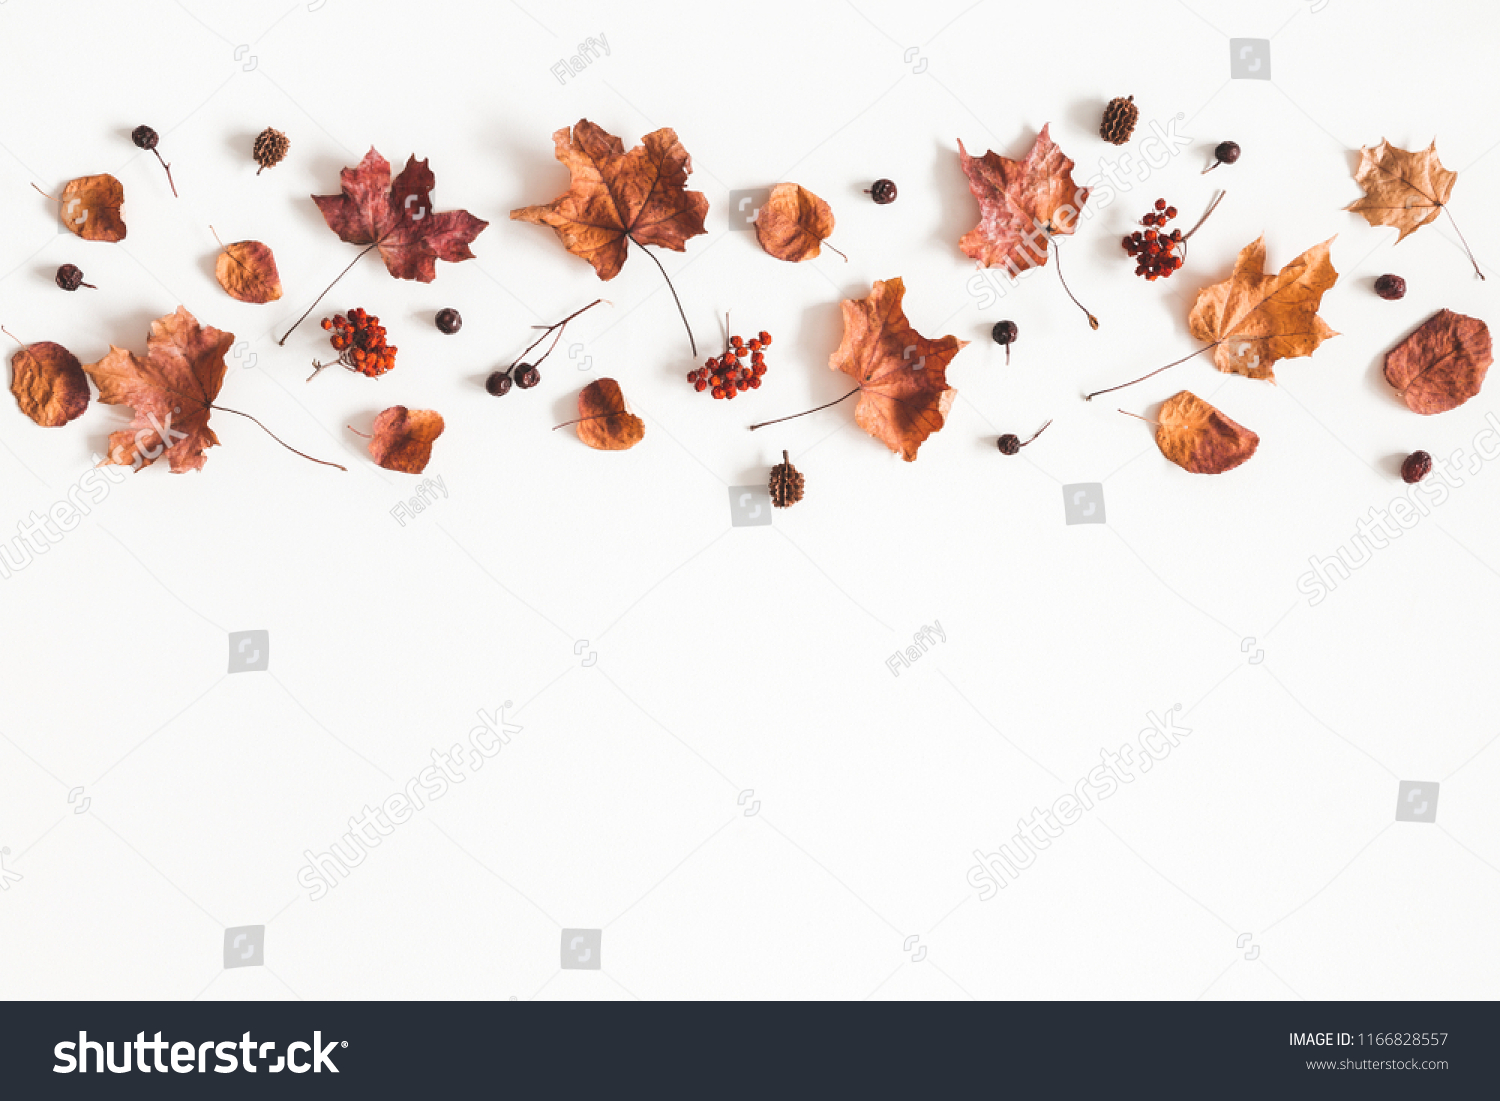 Autumn composition. Pattern made of dried leaves on white background. Autumn, fall concept. Flat lay, top view, copy space #1166828557